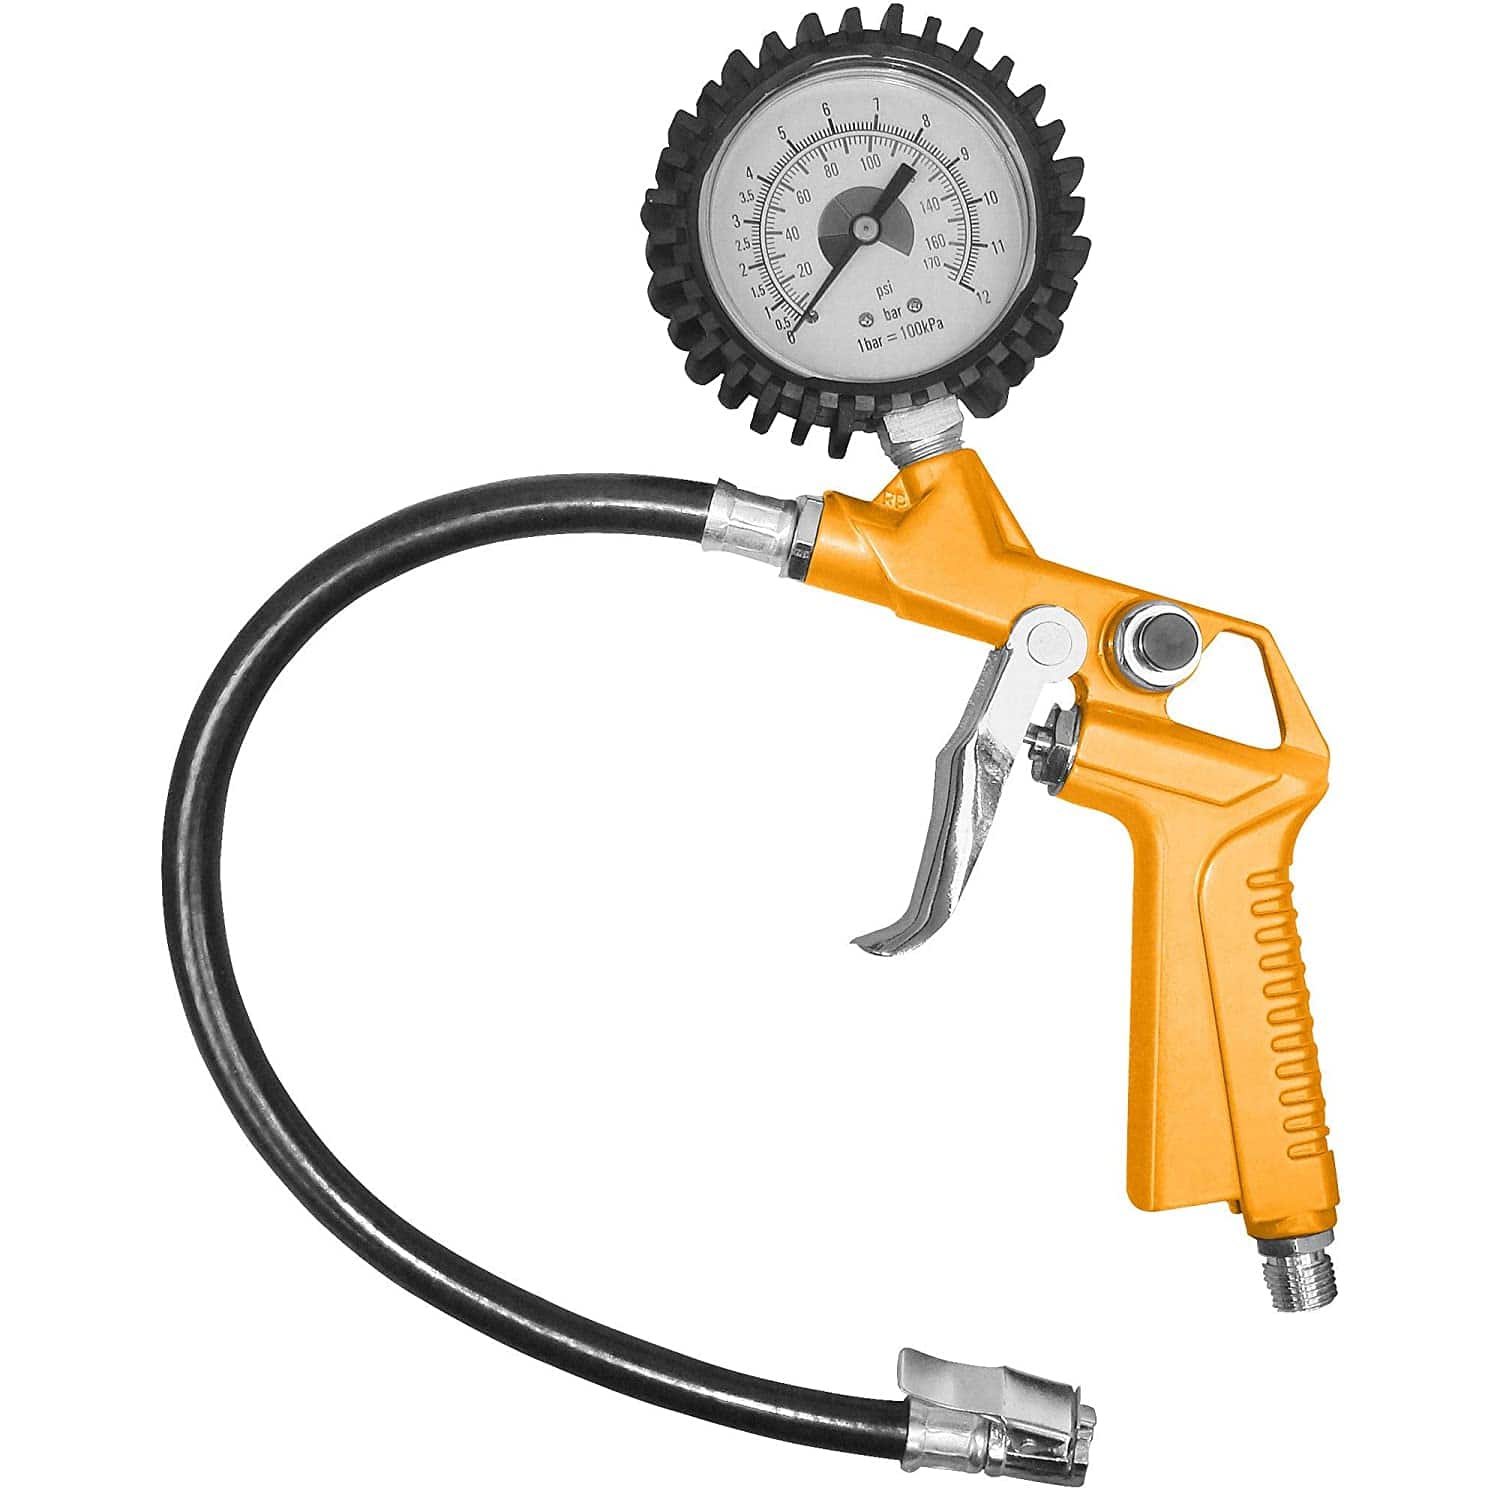 Ingco Tire Inflating Gun for Air Compressor Fitting Tools - ATG0601